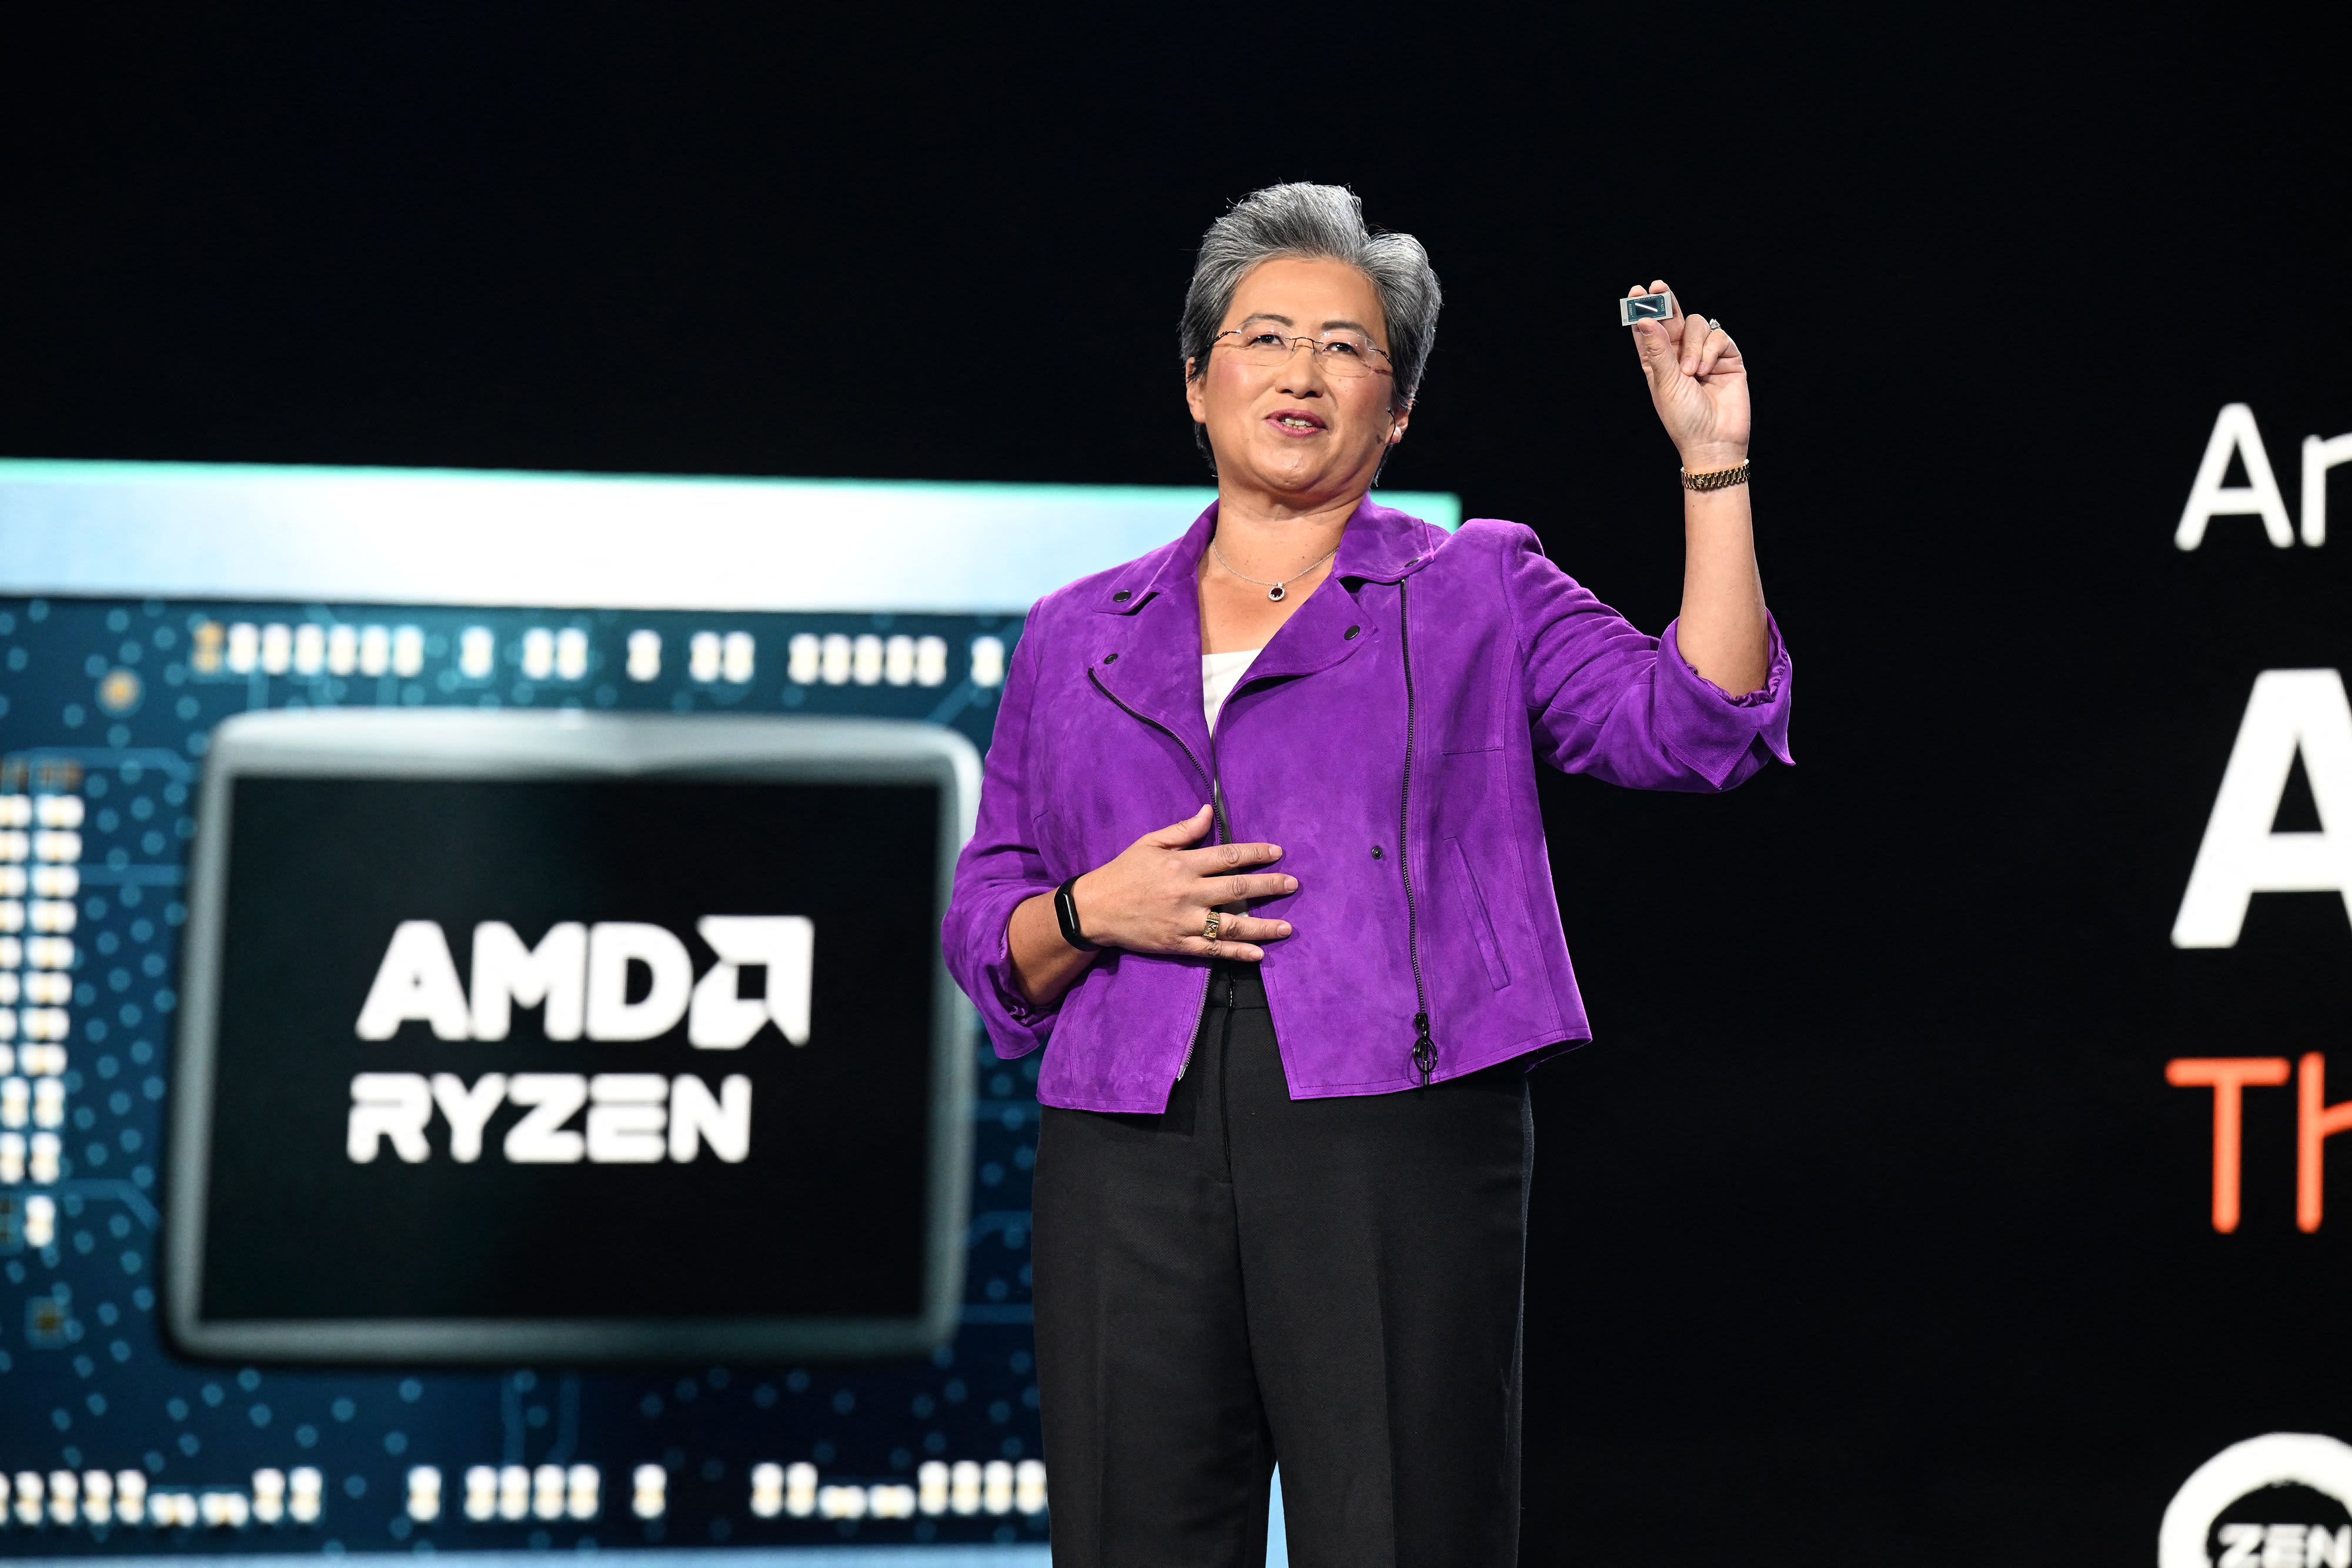 AMD expects to sell $2bn worth of artificial intelligence chips next year